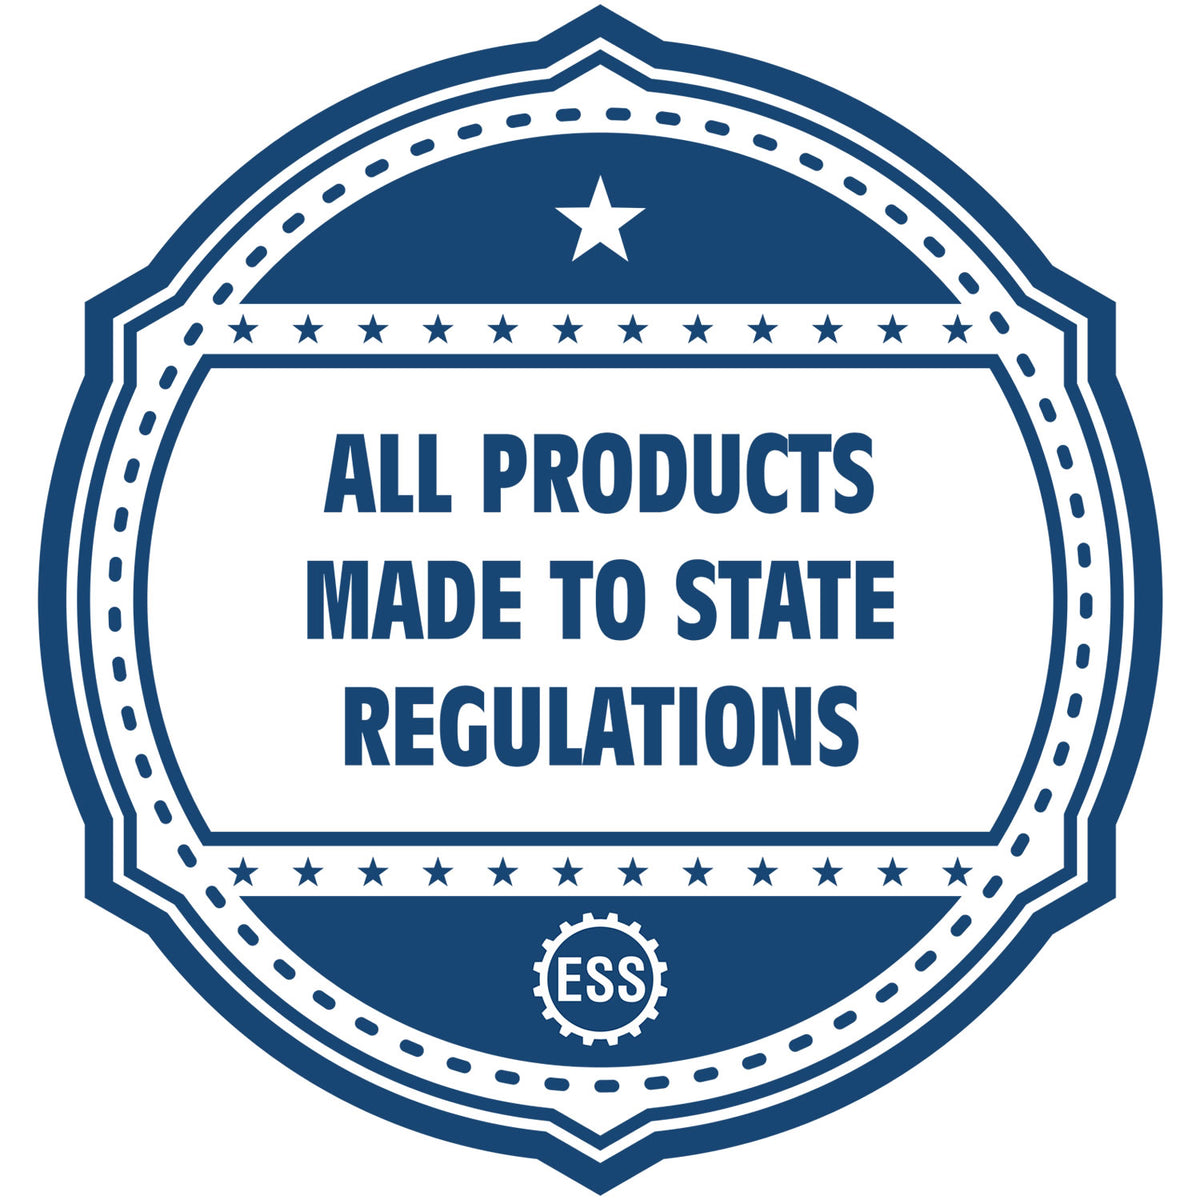 An icon or badge element for the Heavy Duty Cast Iron Kentucky Land Surveyor Seal Embosser showing that this product is made in compliance with state regulations.